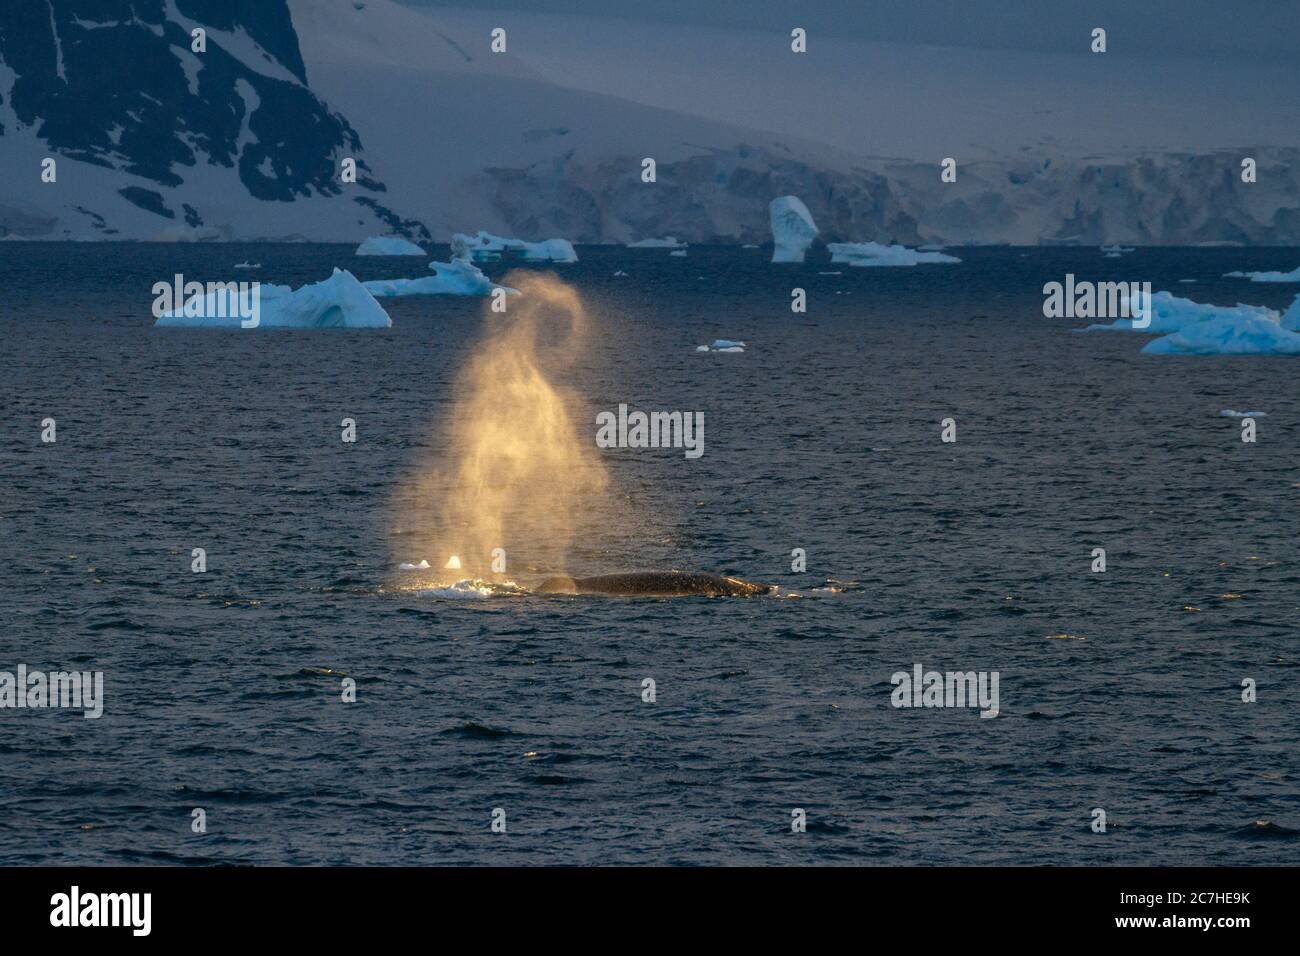 whale blow at sunset; sunlight illuminating whale spout; whale's back; dark icy backdrop; icebergs; shadowy landscape; Antarctic coastline; ice cliffs Stock Photo